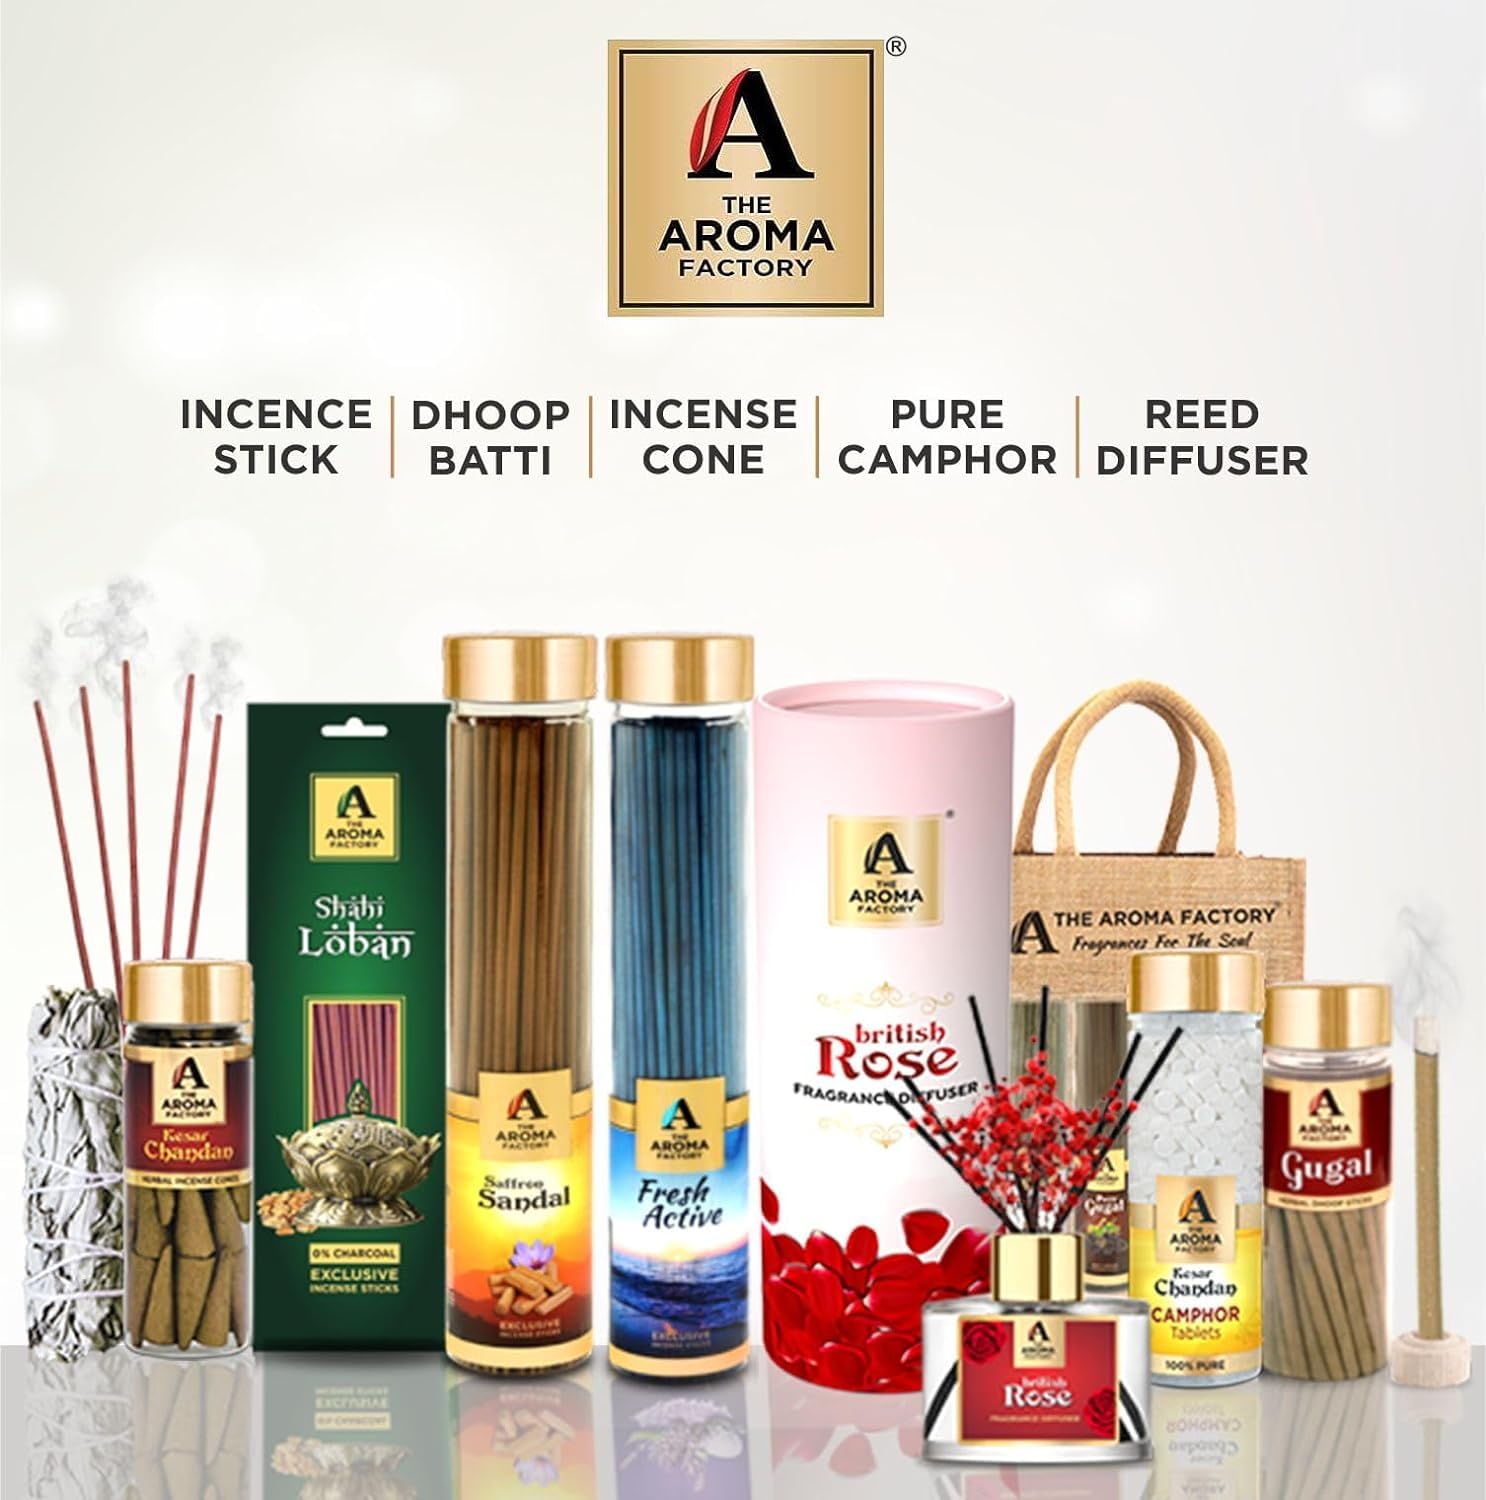 The Aroma Factory Happy Birthday with Card (25 Swad Candy, Mogra Agarbatti Bottle, Oudh Cone) in Jute Bag